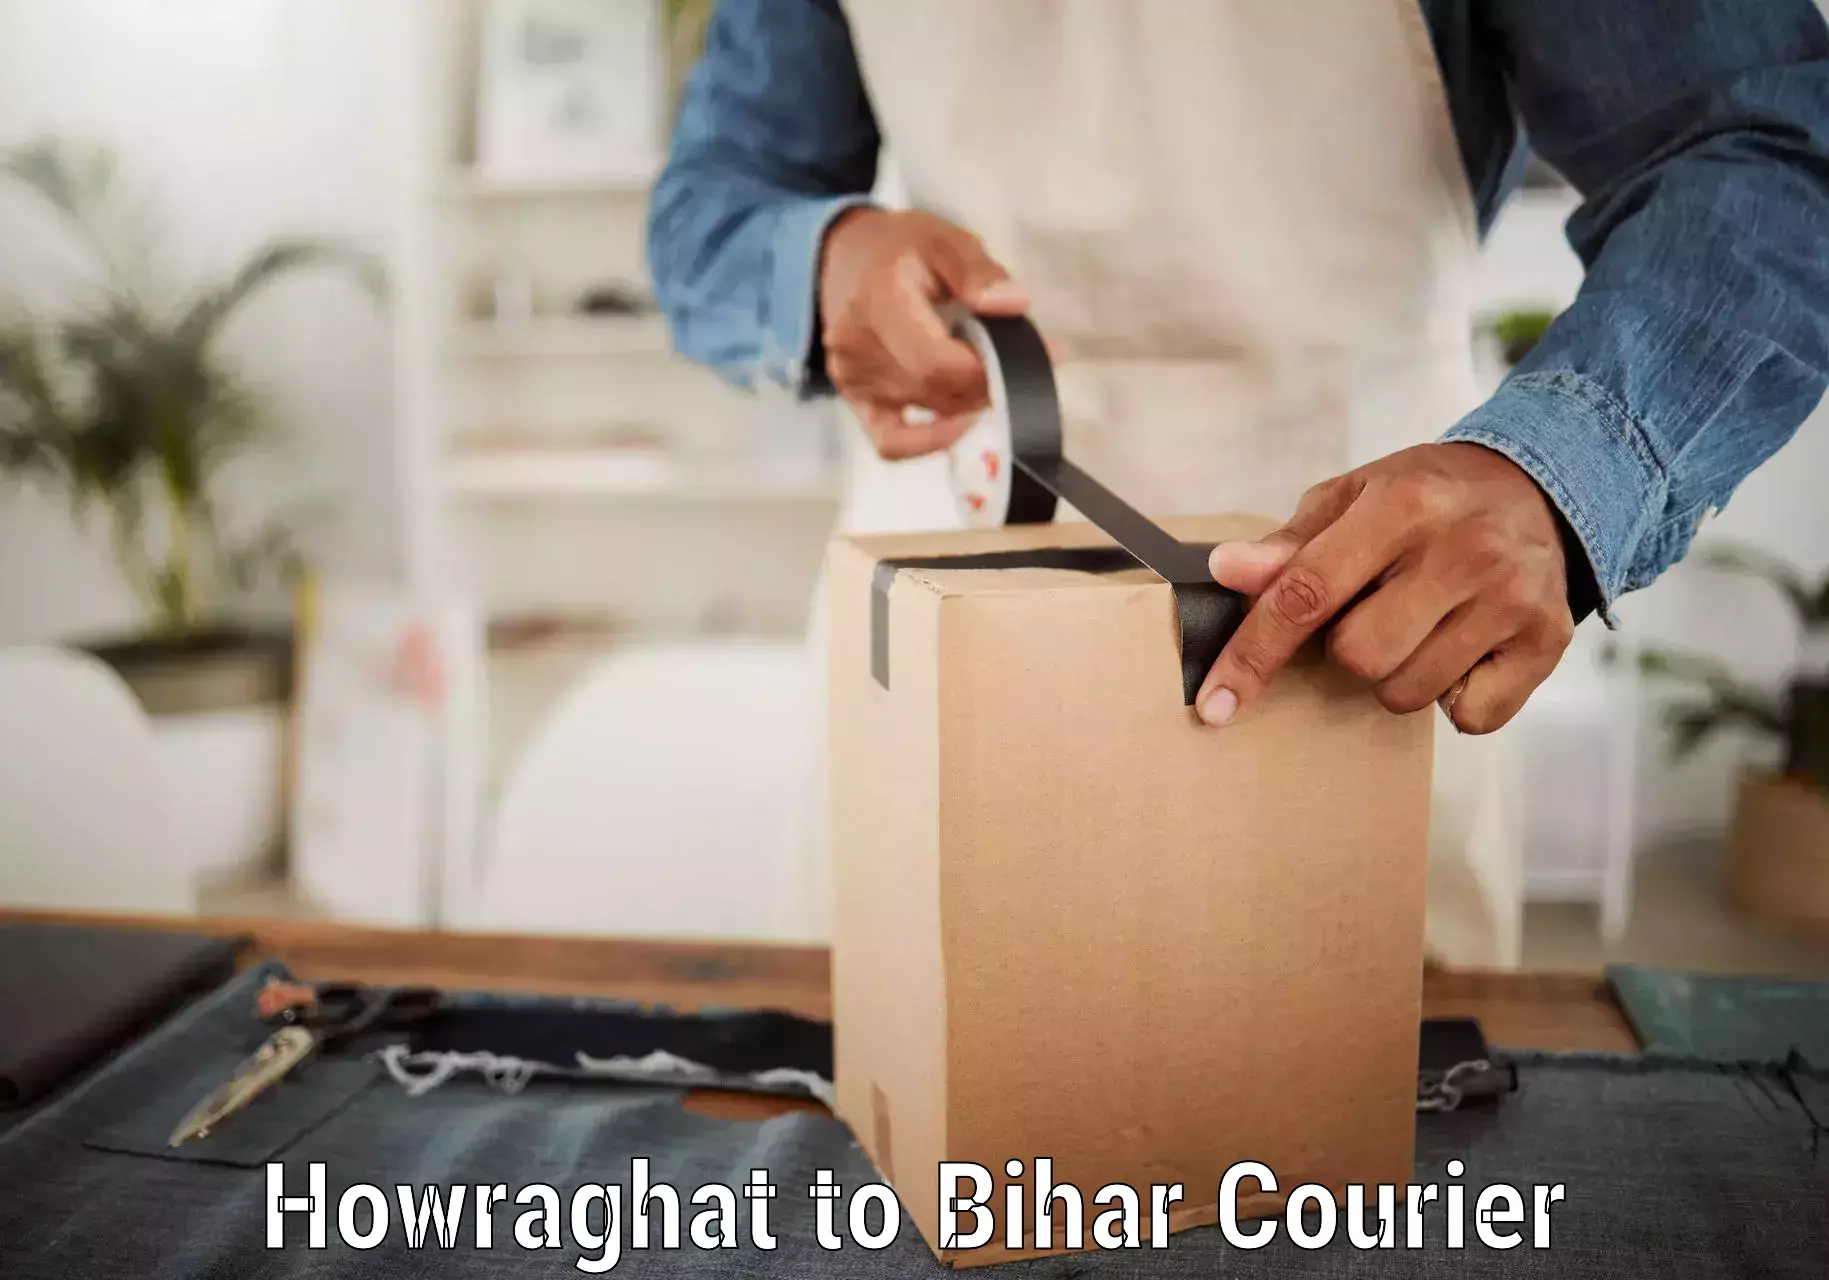 Affordable parcel service Howraghat to Sursand